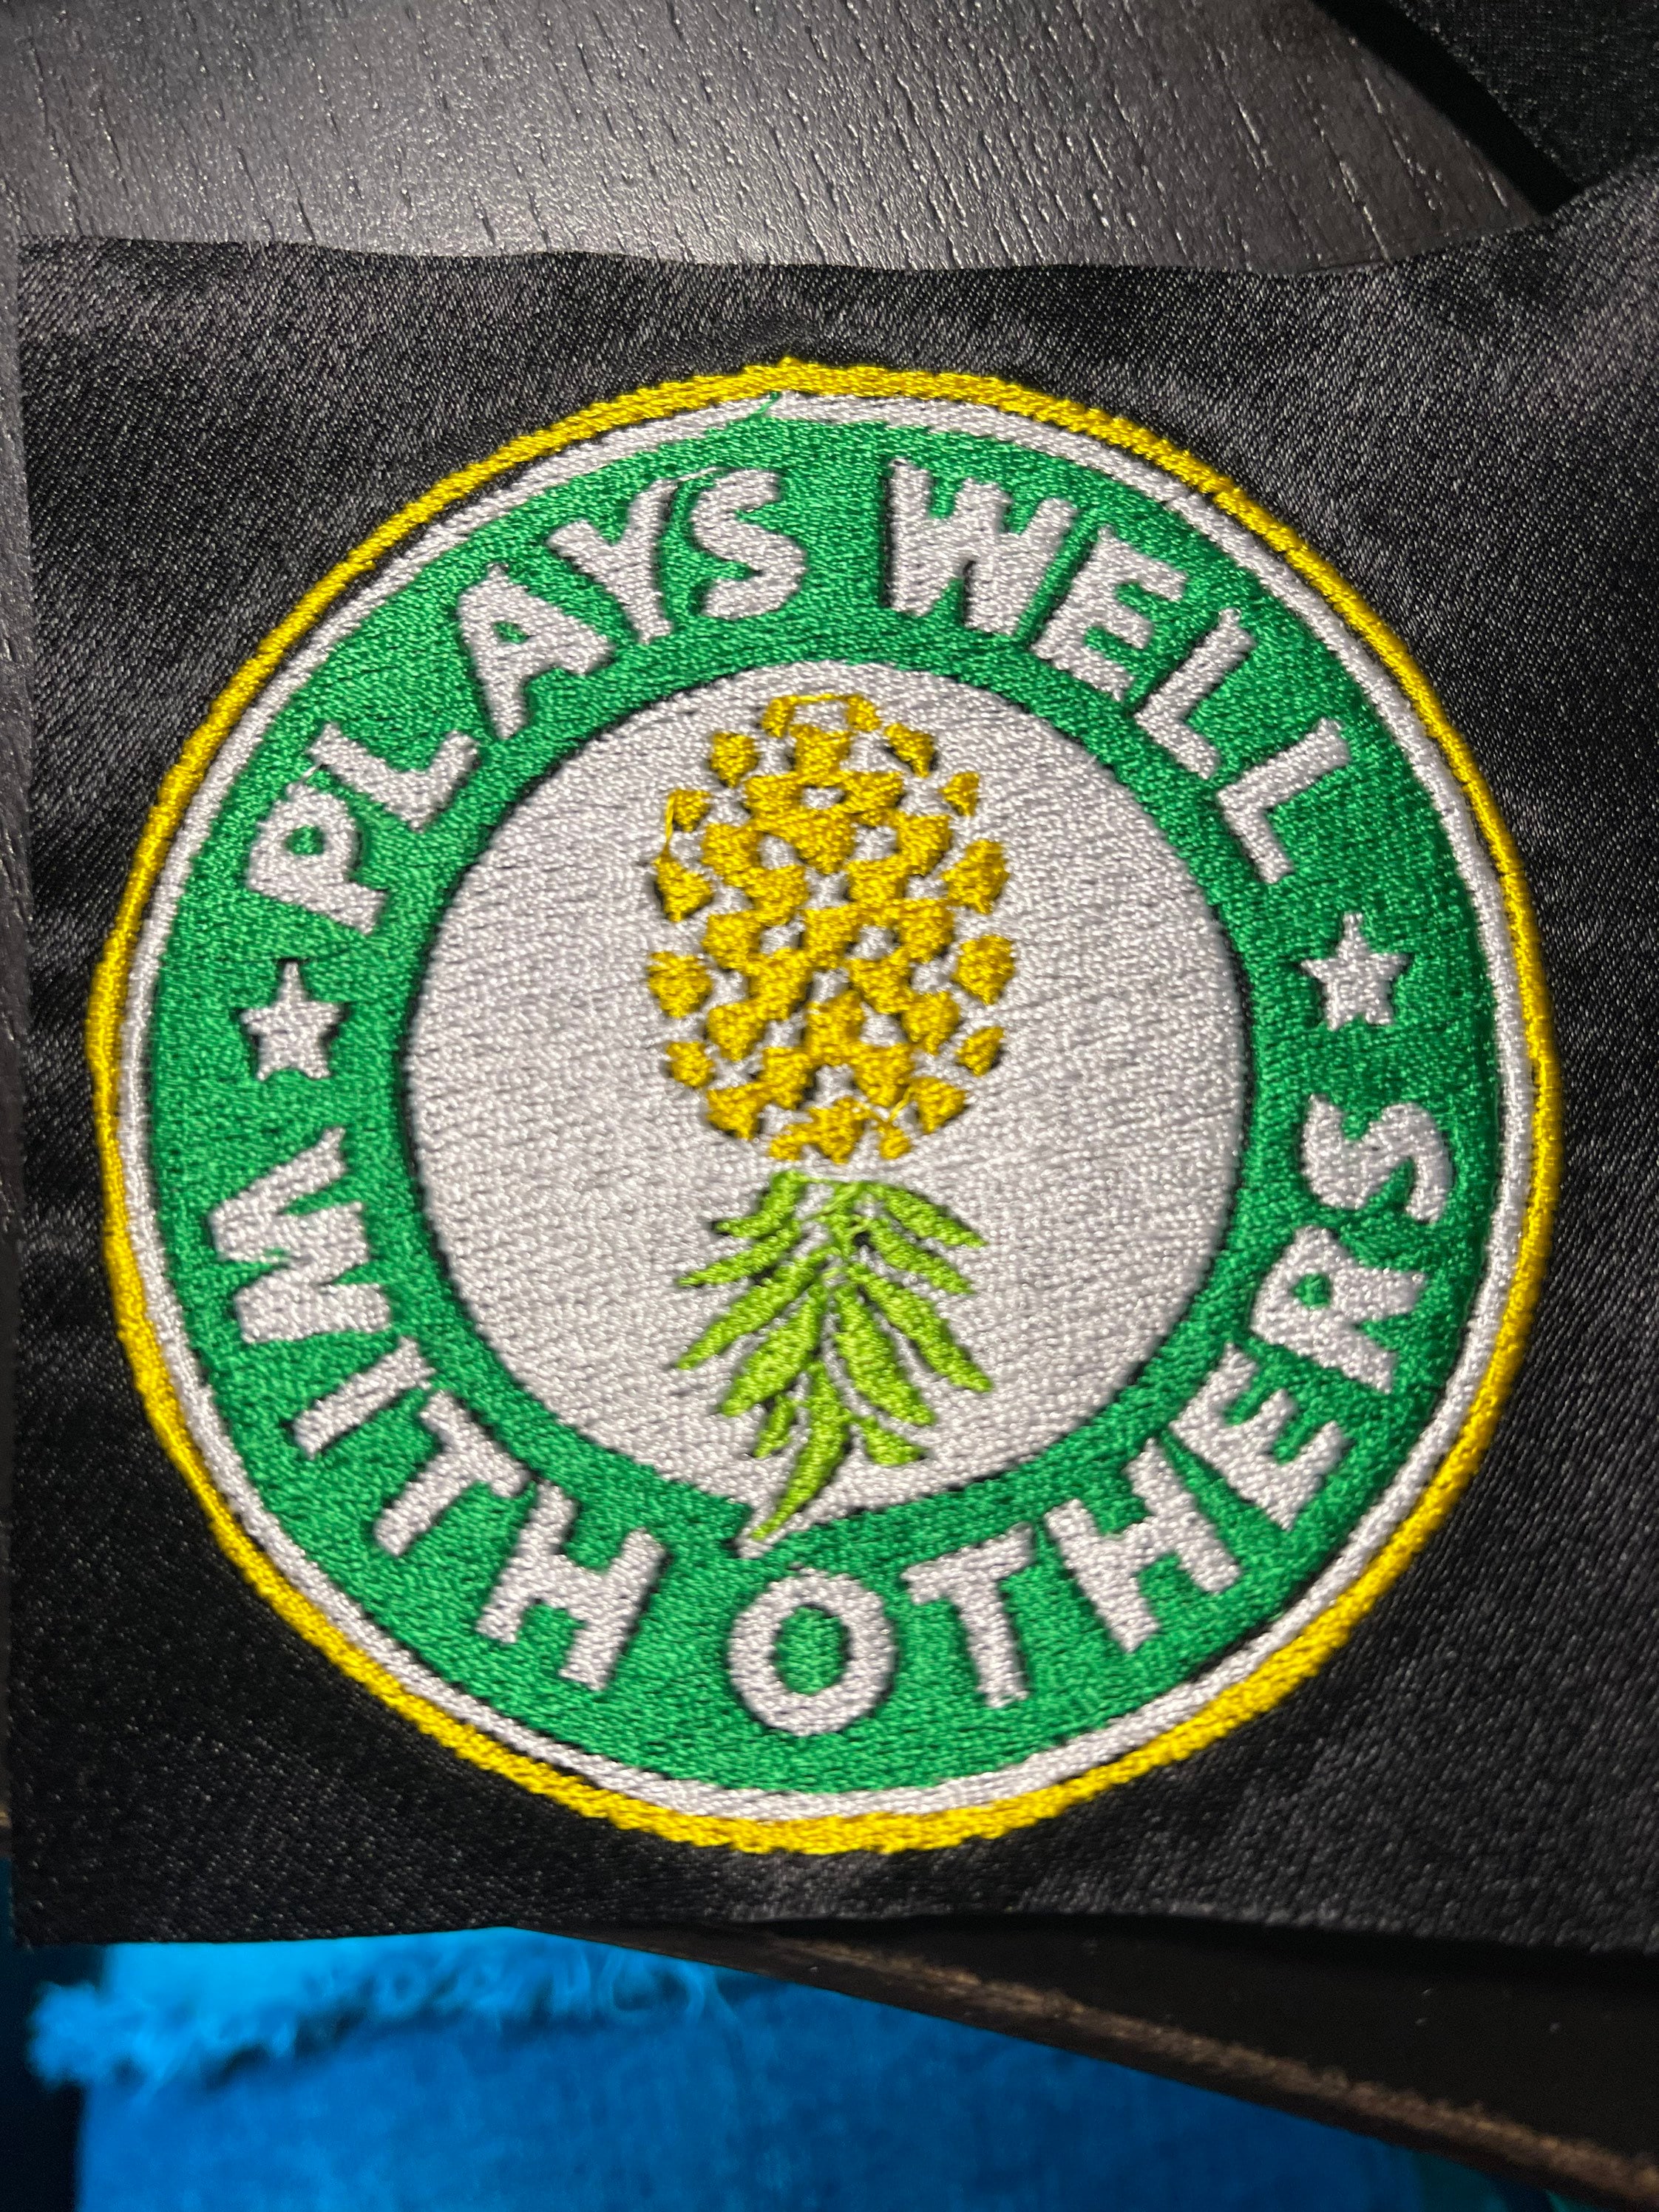 Upside Down Pineapple Swingers Patch Plays Well With Others